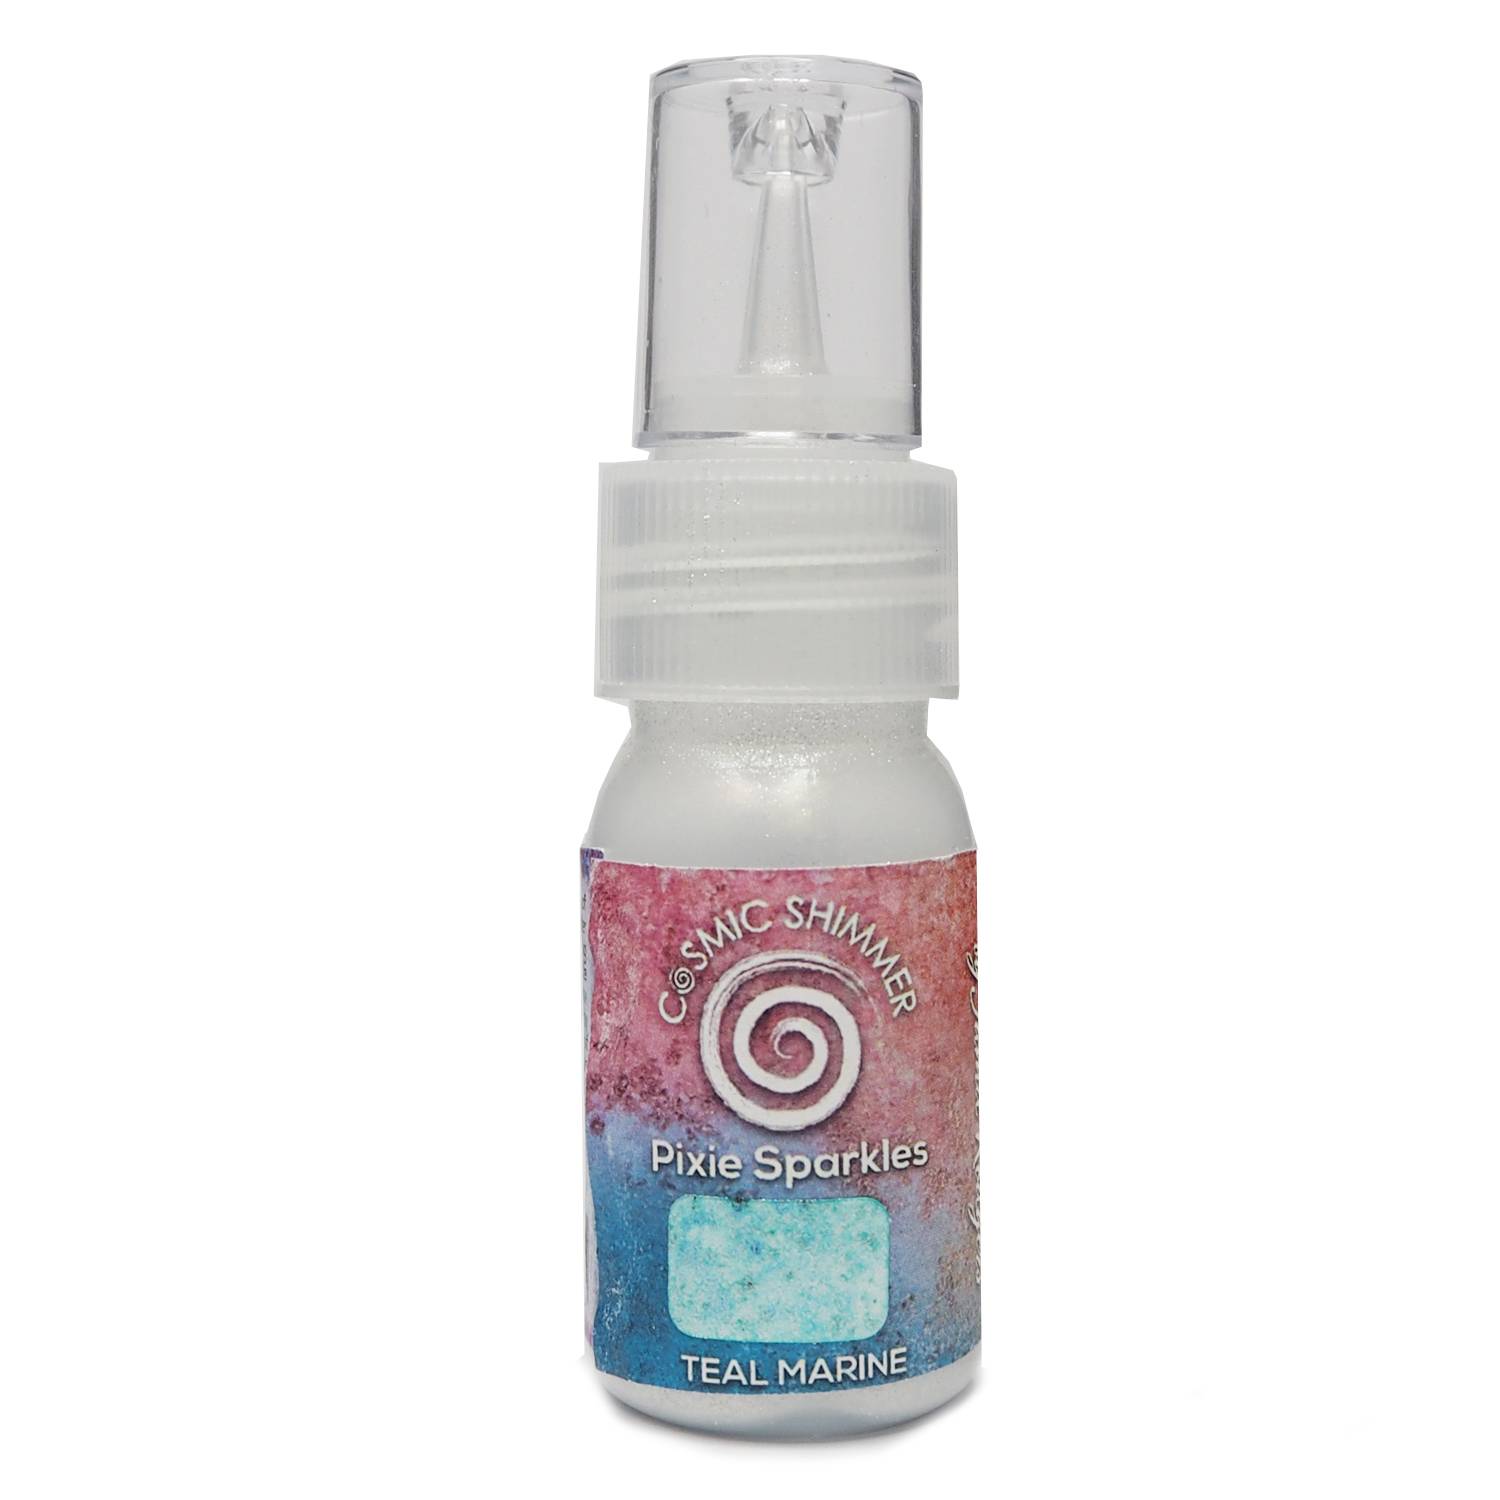 Cosmic Shimmer Jamie Rodgers Pixie Sparkles Teal Marine 30ml ...